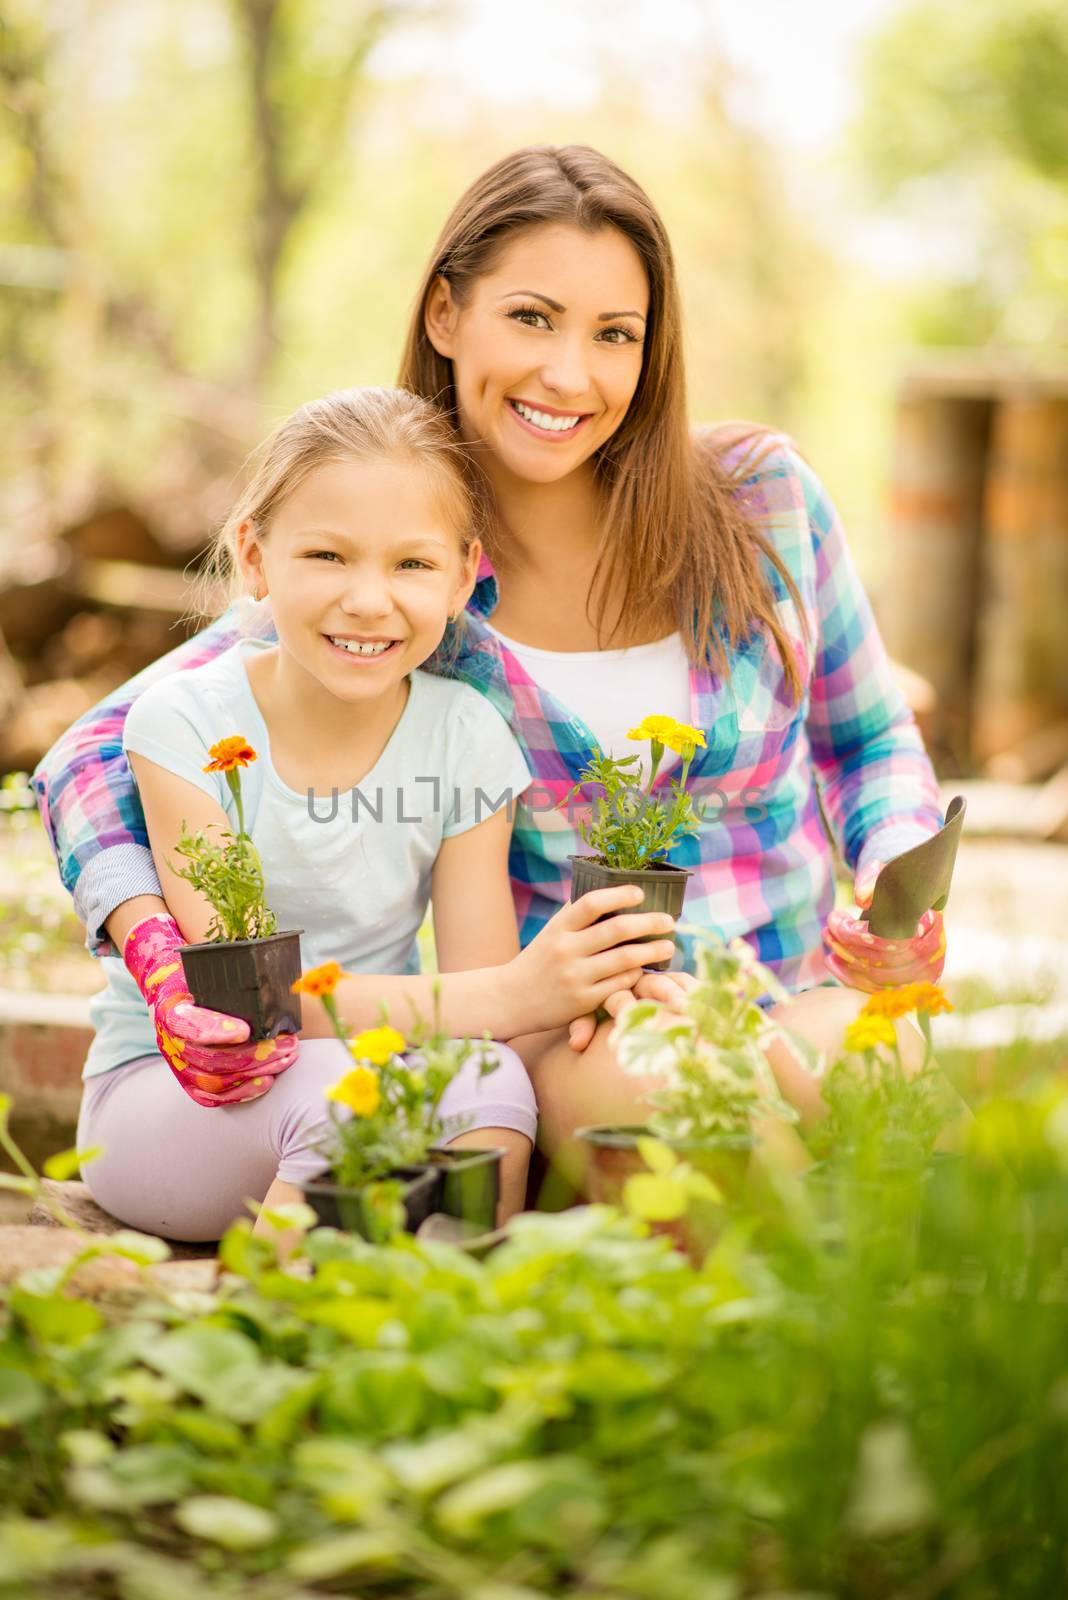 Beautiful mother and daughter planting flowers together.